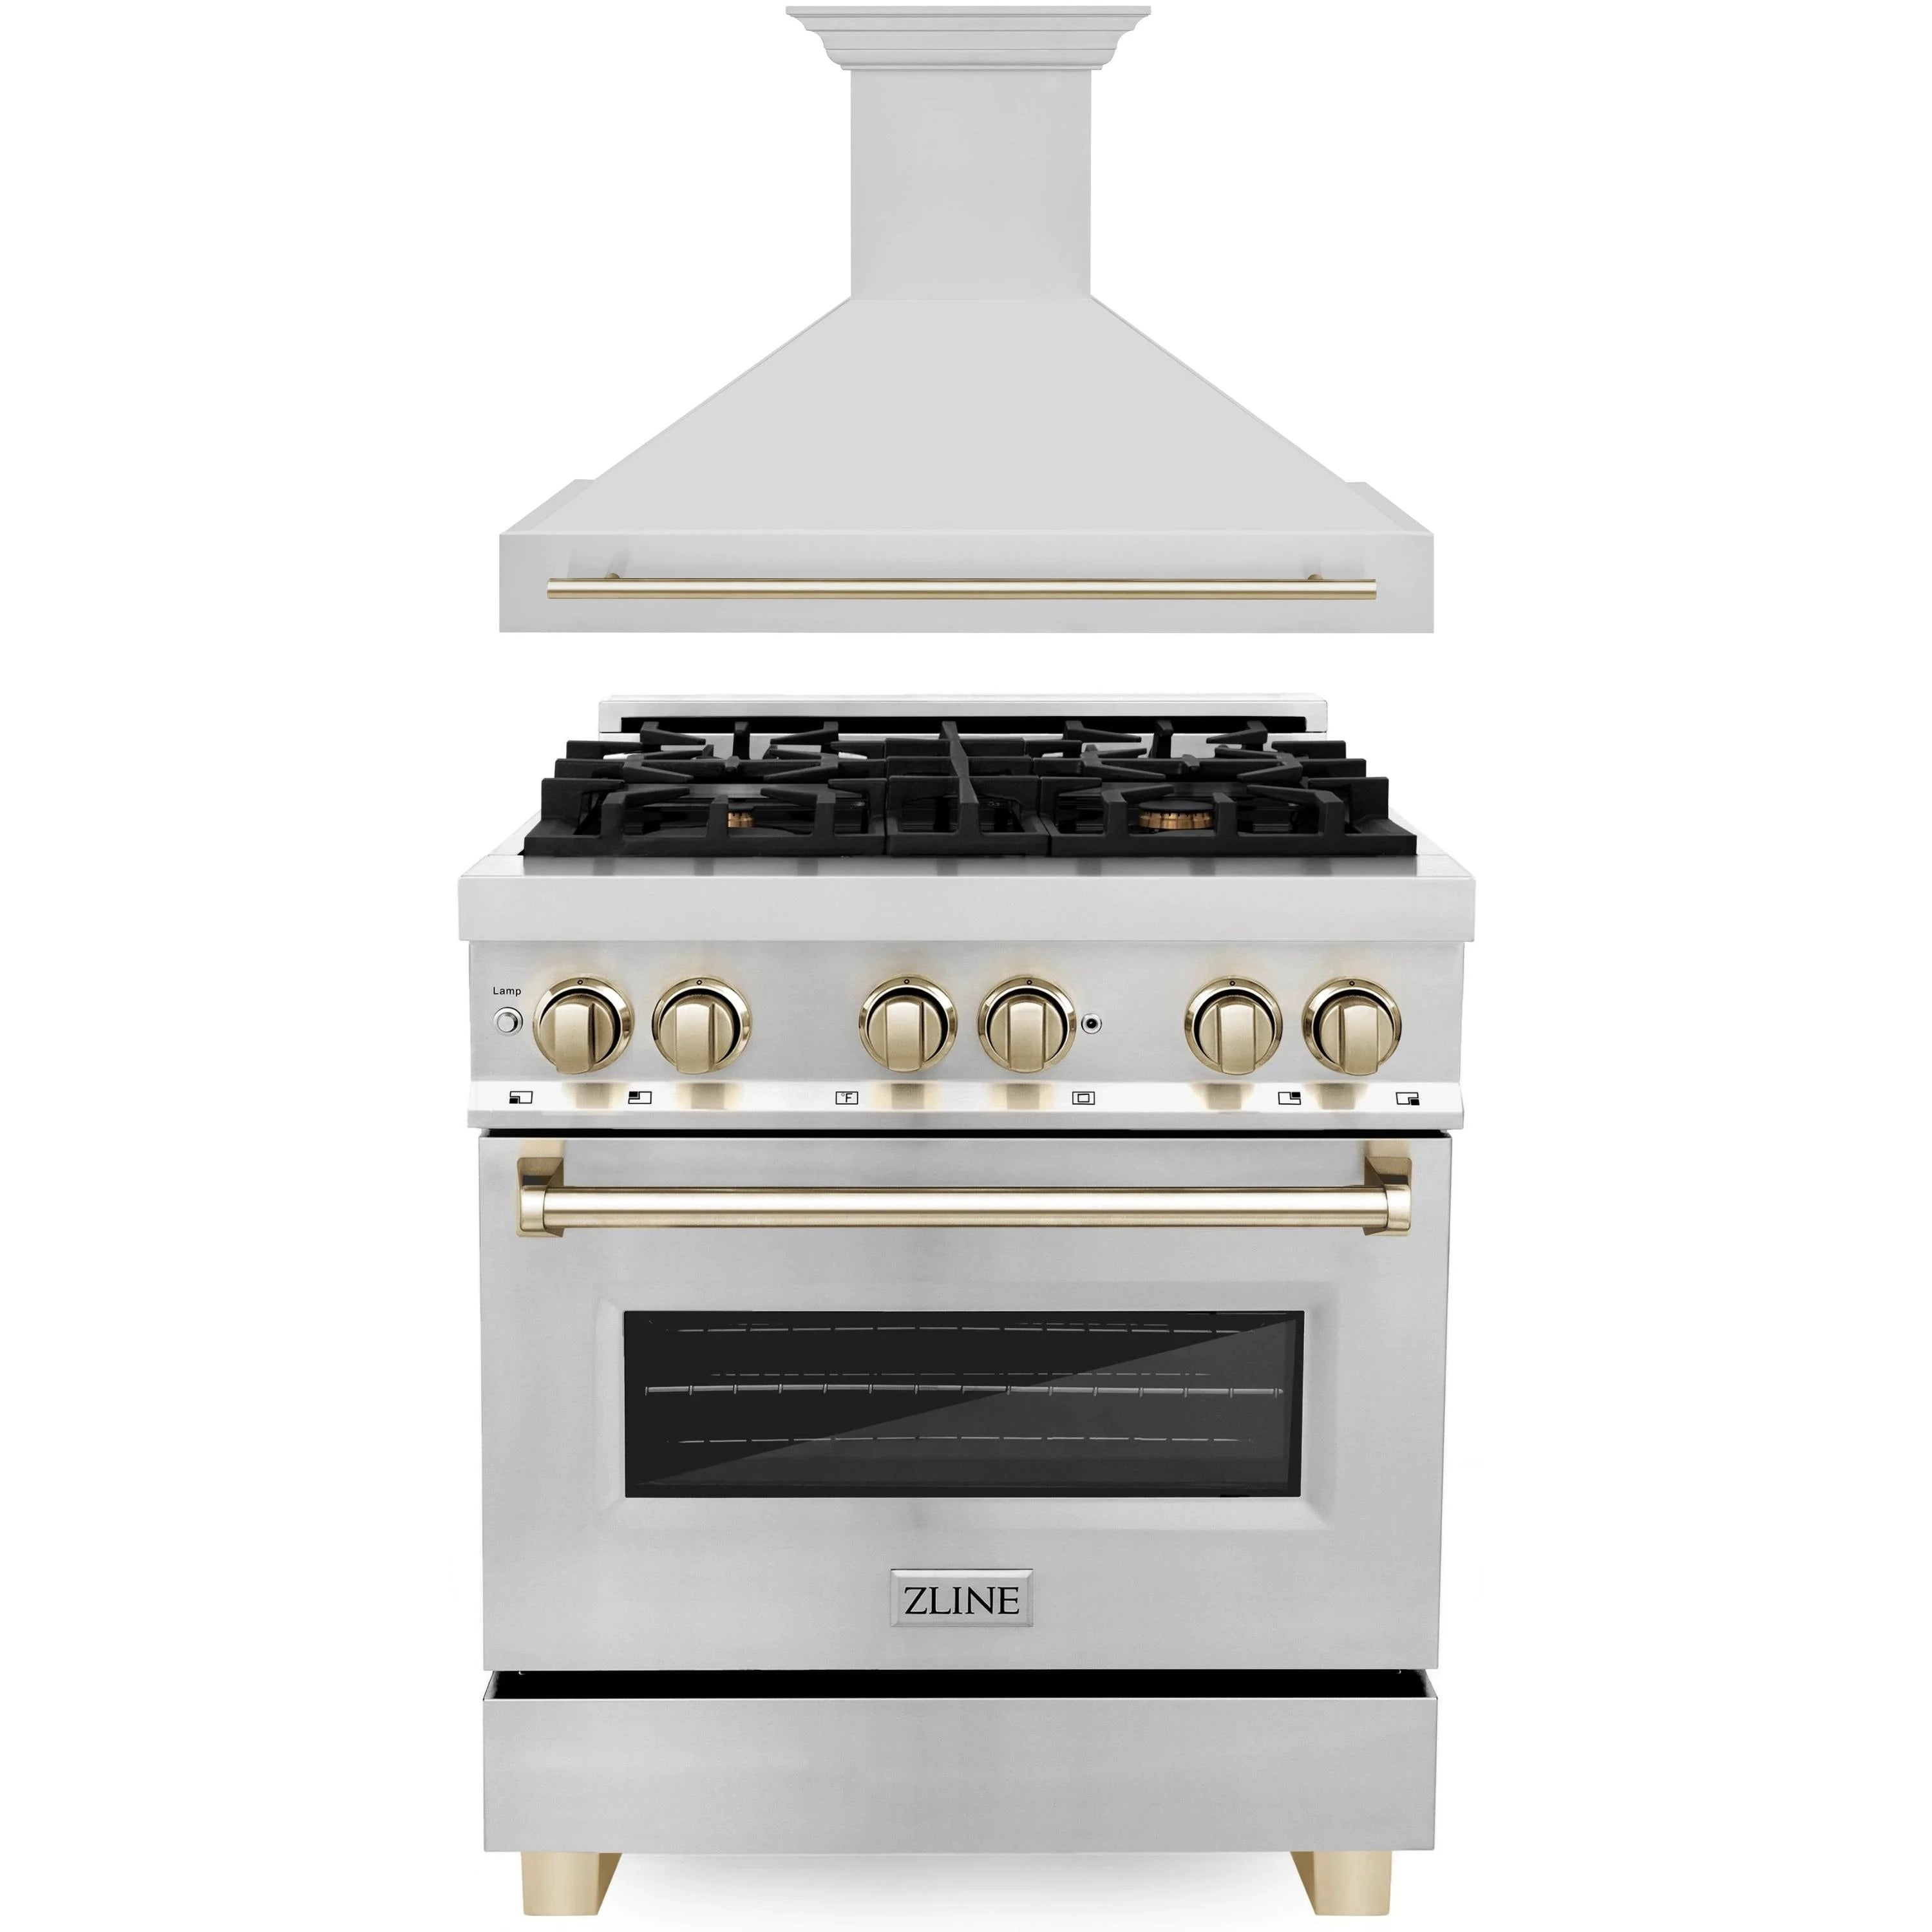 ZLINE Autograph Edition 2-Piece Appliance Package - 30-Inch Dual Fuel Range & Wall Mounted Range Hood in Stainless Steel with Gold Trim (2AKP-RARH30-G)